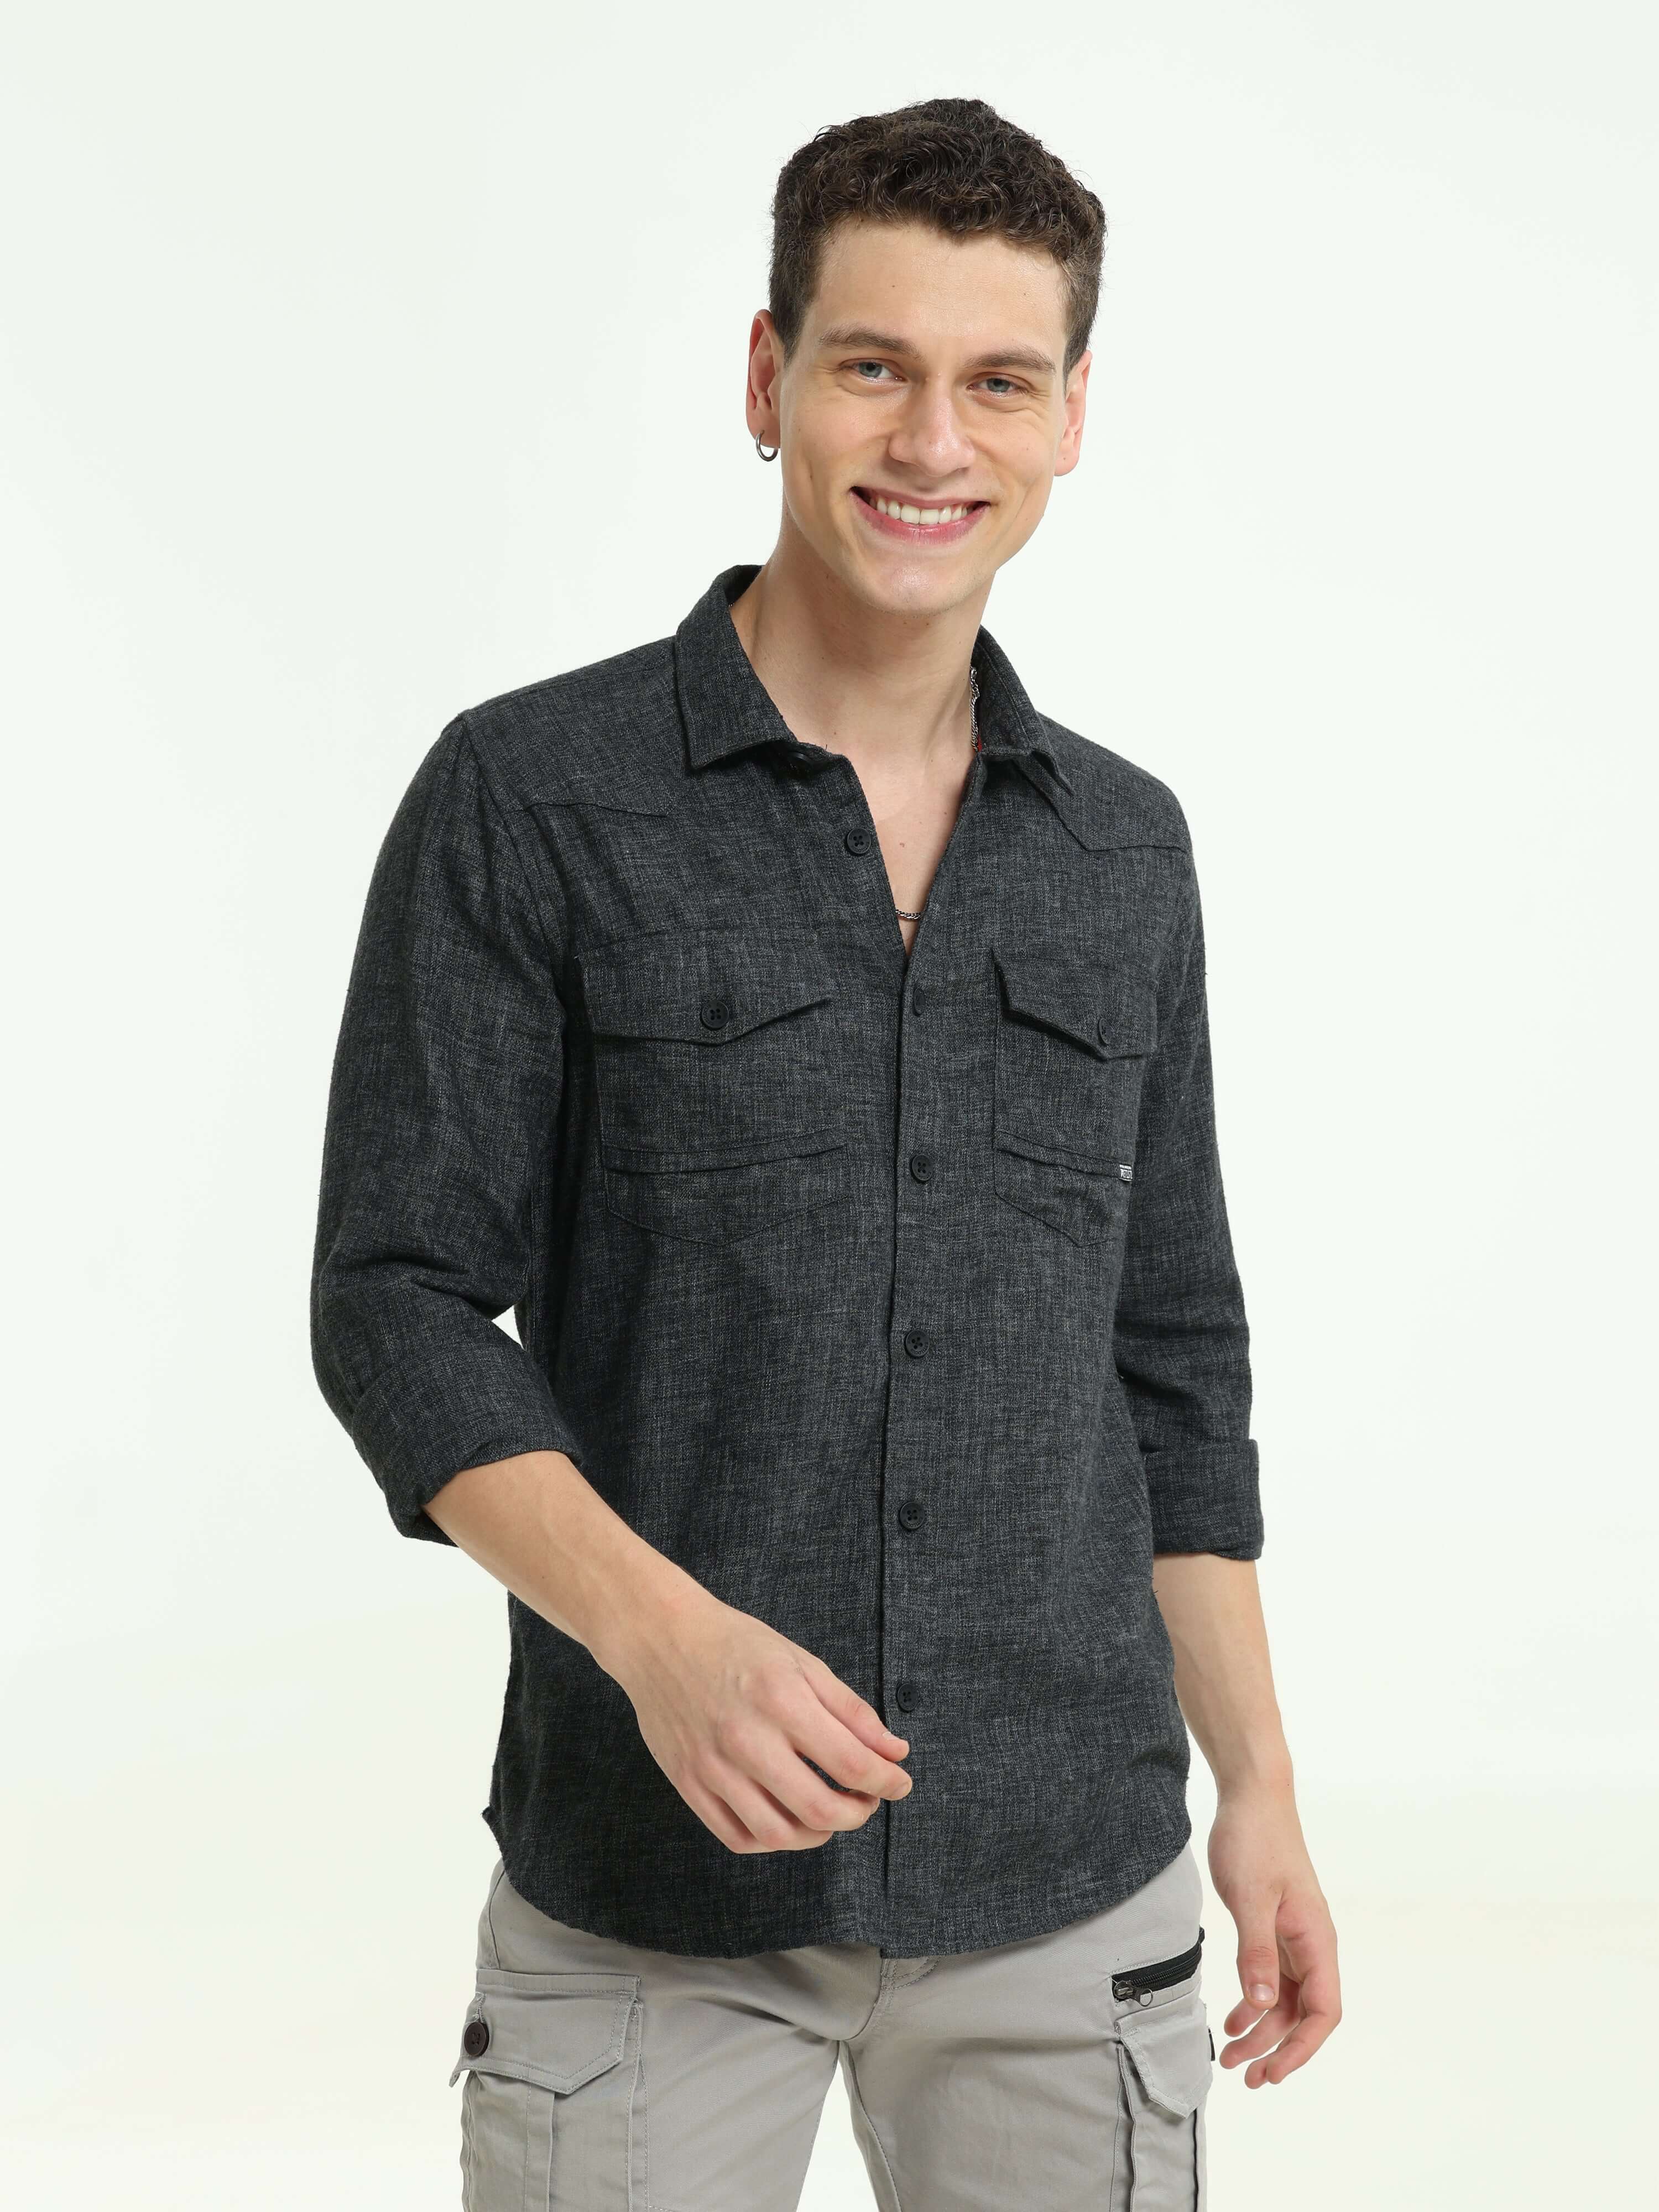 Charcoal grey solid double pocket shirt shop online at Estilocus. 100% Cotton • Full-sleeve solid shirt• Cut and sew placket• Regular collar• Double button edge cuff • Double pocket with flap • Curved bottom hemline . • All double needle construction, fin